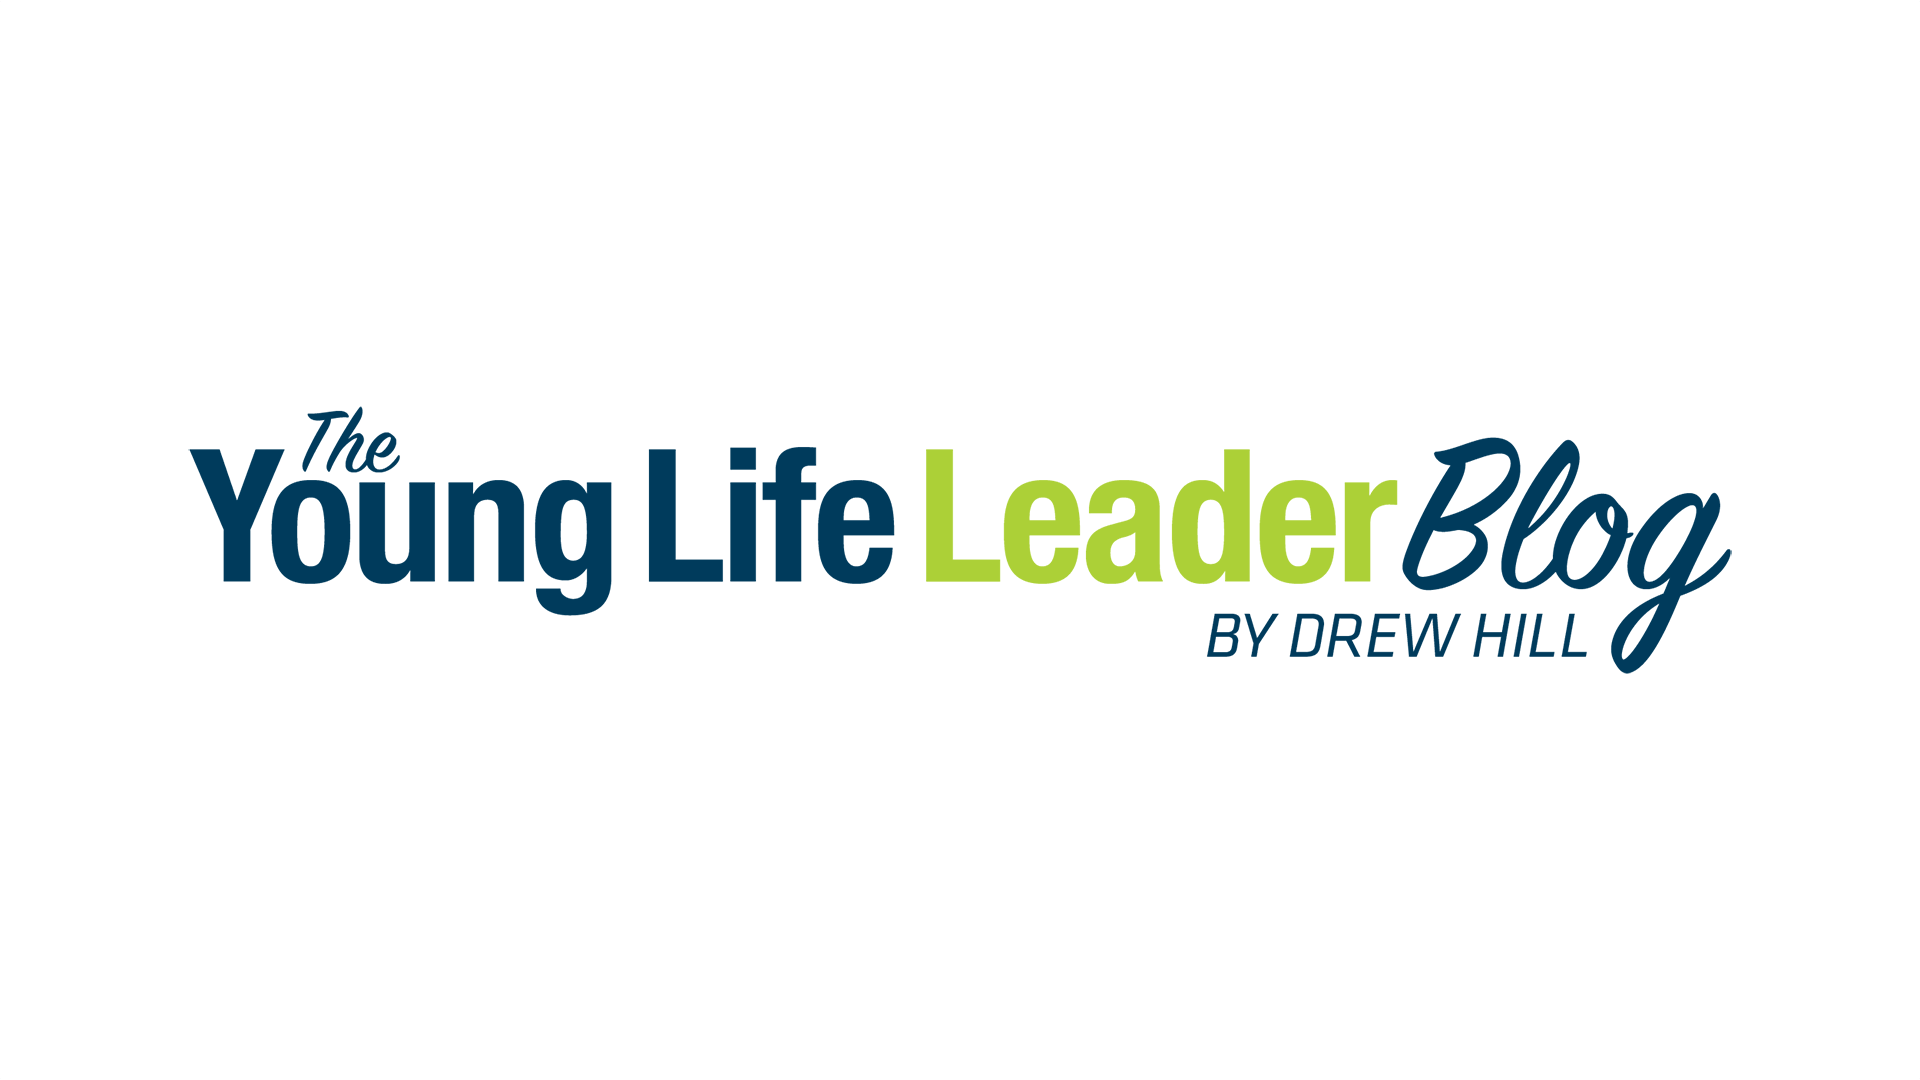 Top Secret Club – YLHelp: Help for Young Life Leaders